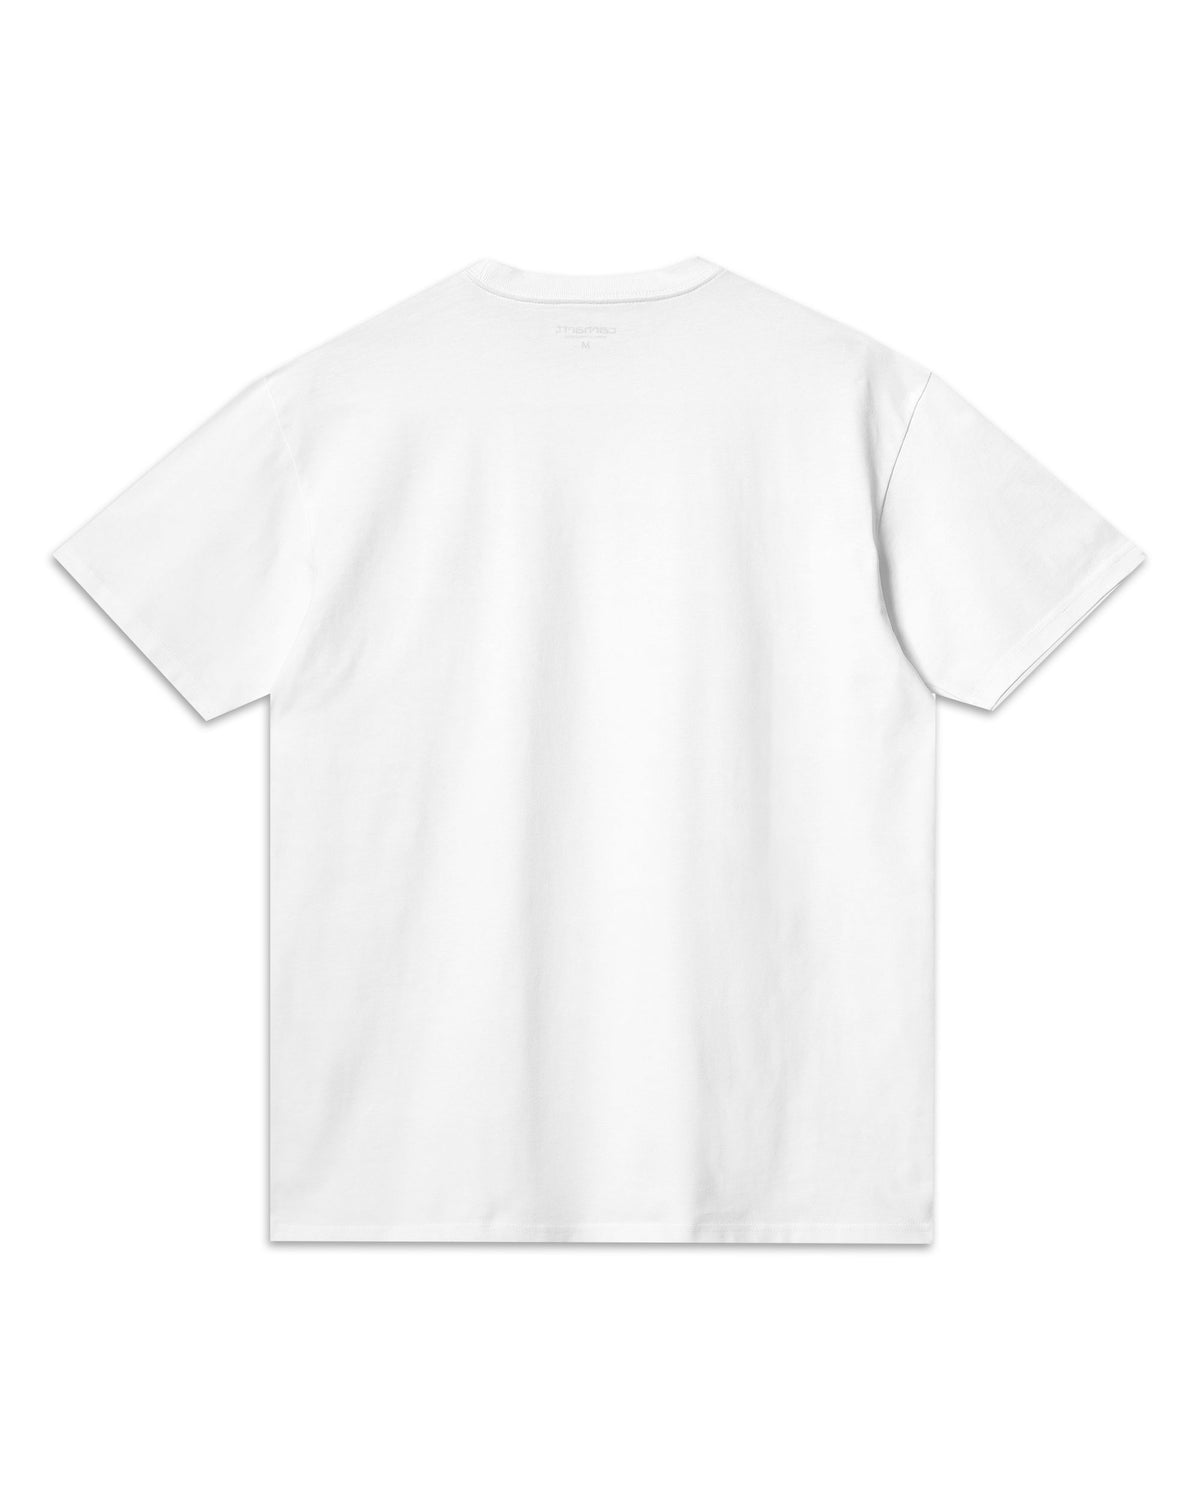 Carhartt Wip Chase T-shirt White Gold